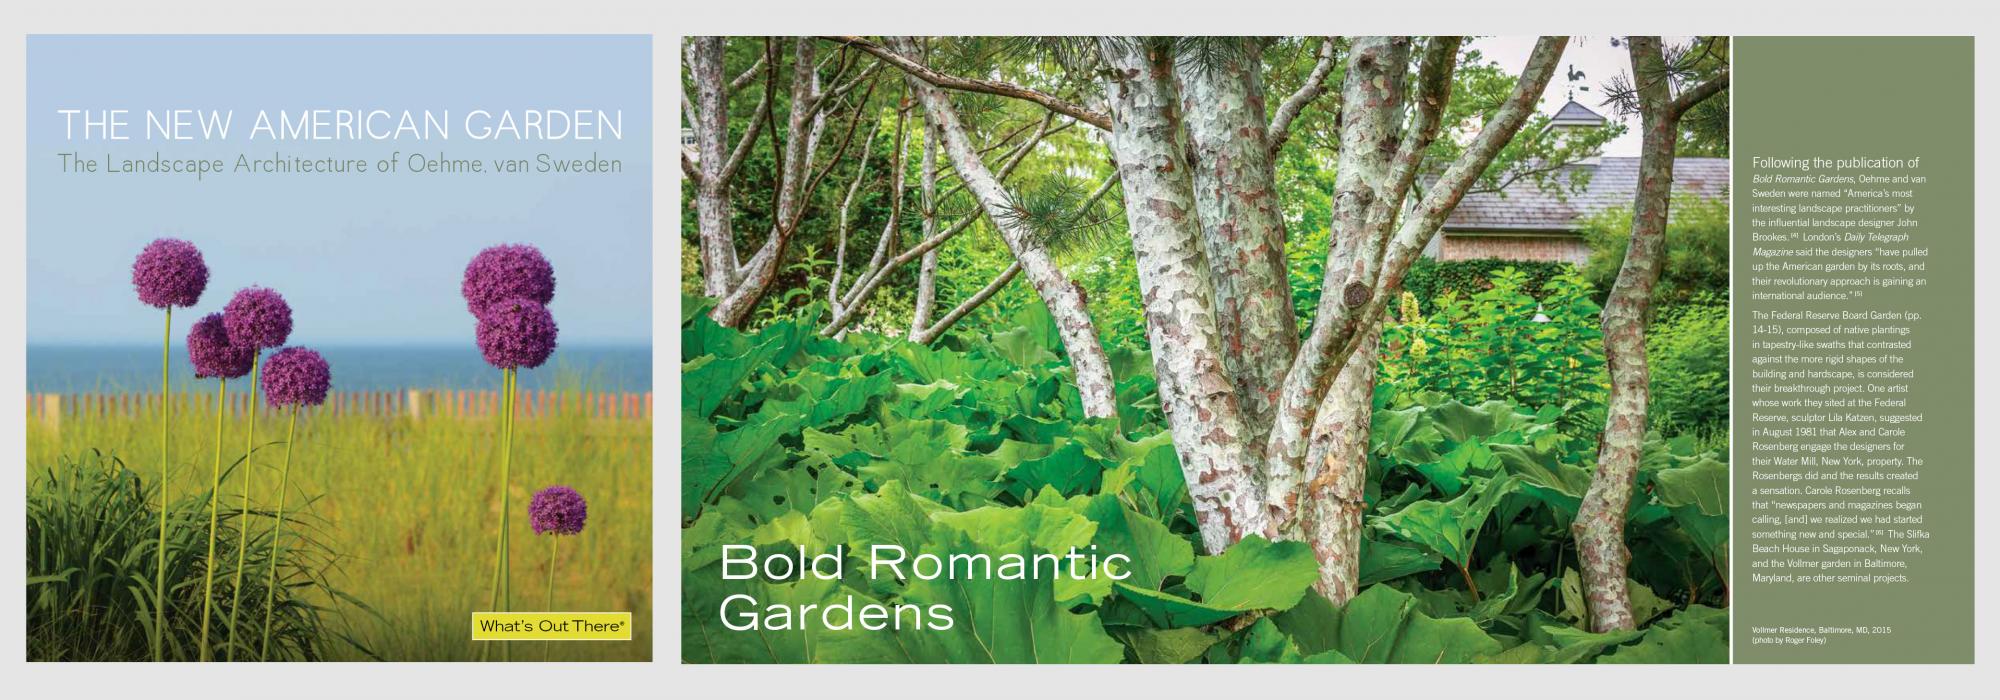 The New American Garden Gallery Guide